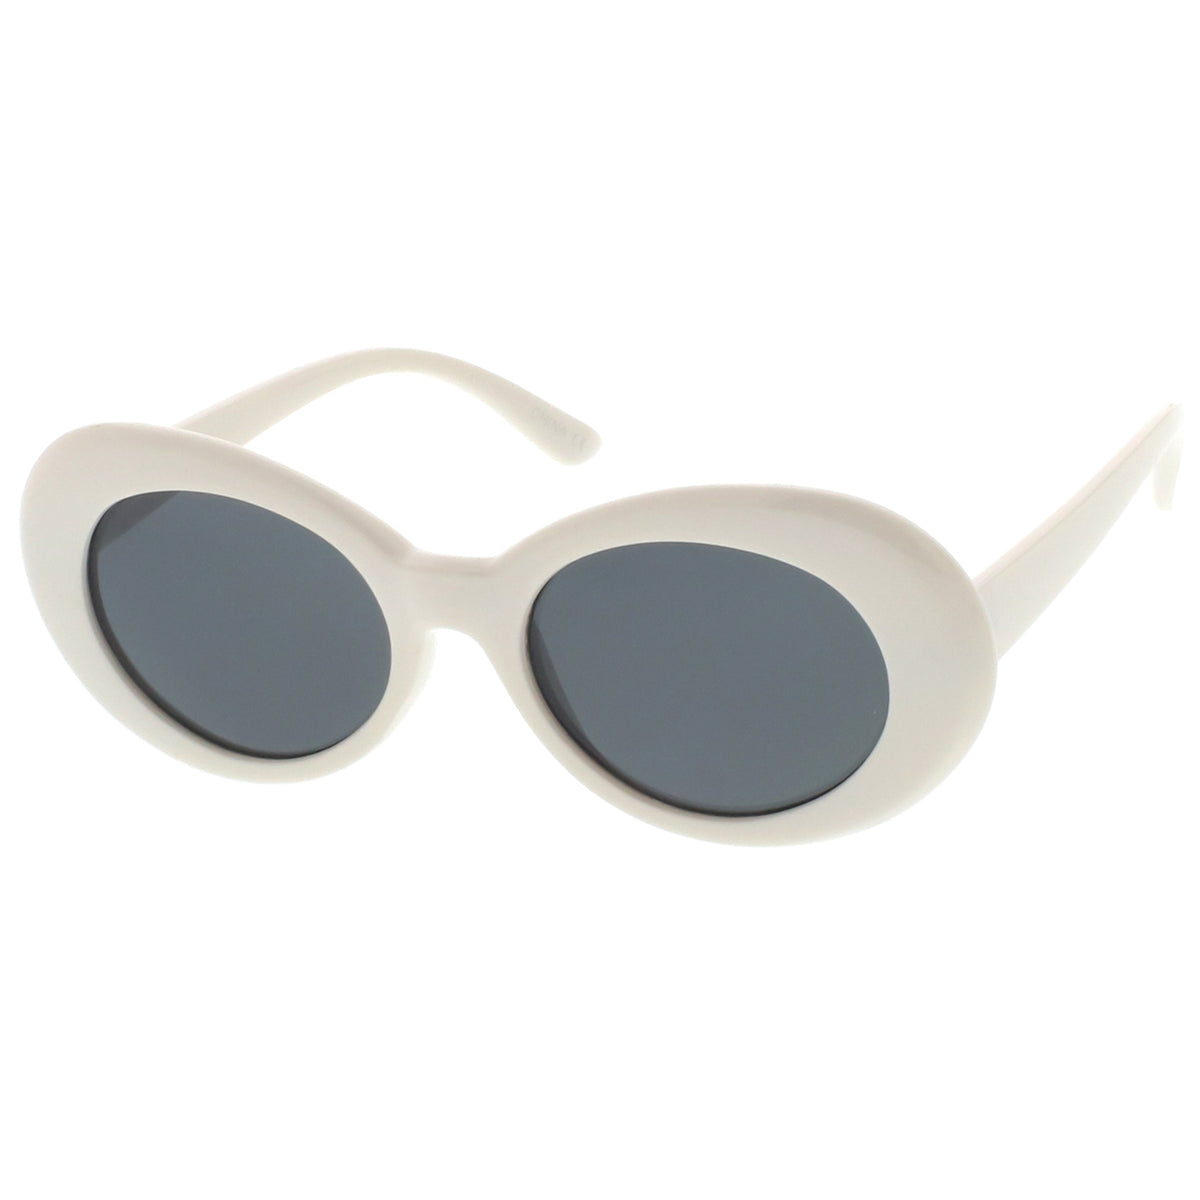 Retro Oval Sunglasses With Tapered Arms Neutral Colored Round Lens 51m Sunglass La